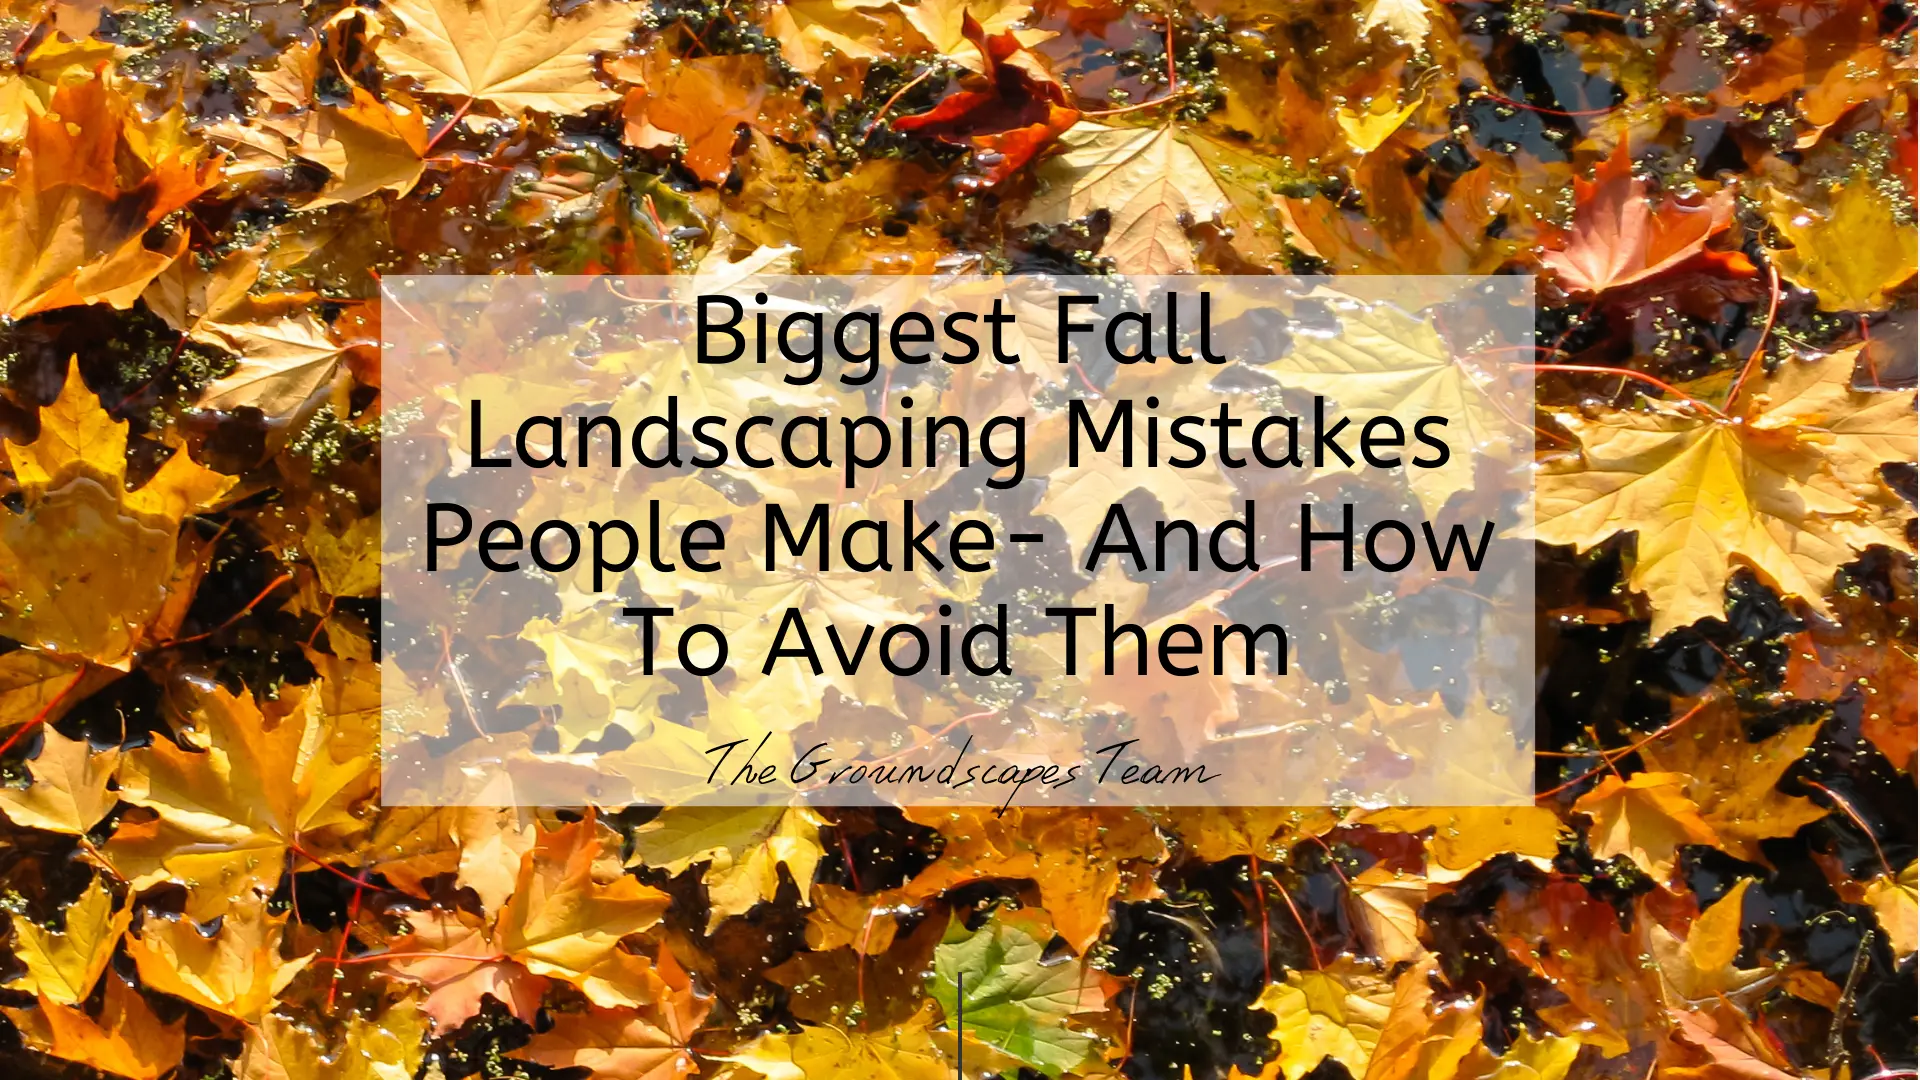 Biggest Fall Landscaping Mistakes People Make- And How To Avoid Them